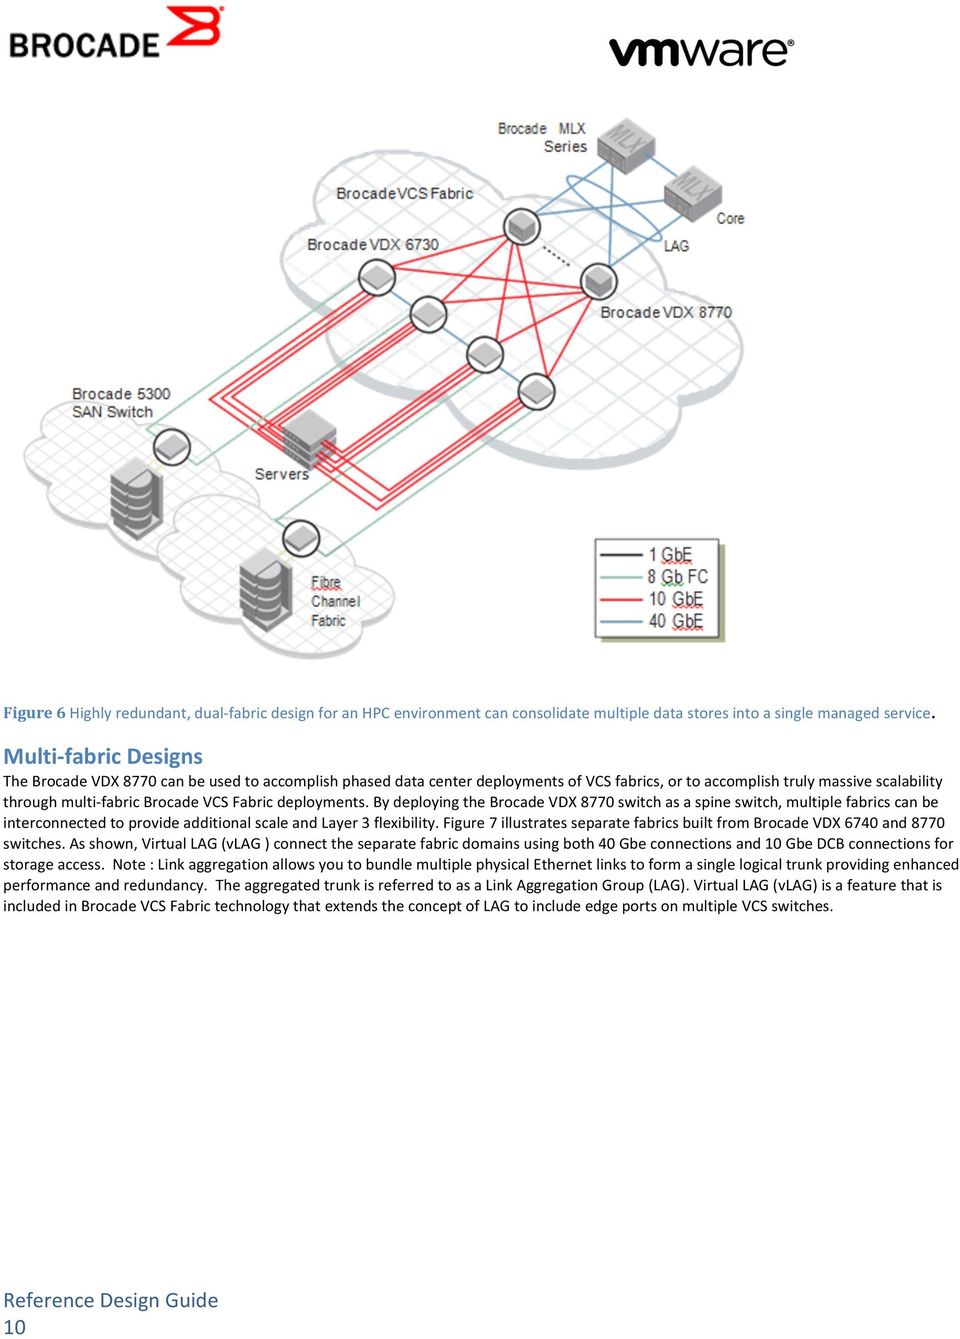 deployments. By deploying the Brocade VDX 8770 switch as a spine switch, multiple fabrics can be interconnected to provide additional scale and Layer 3 flexibility.